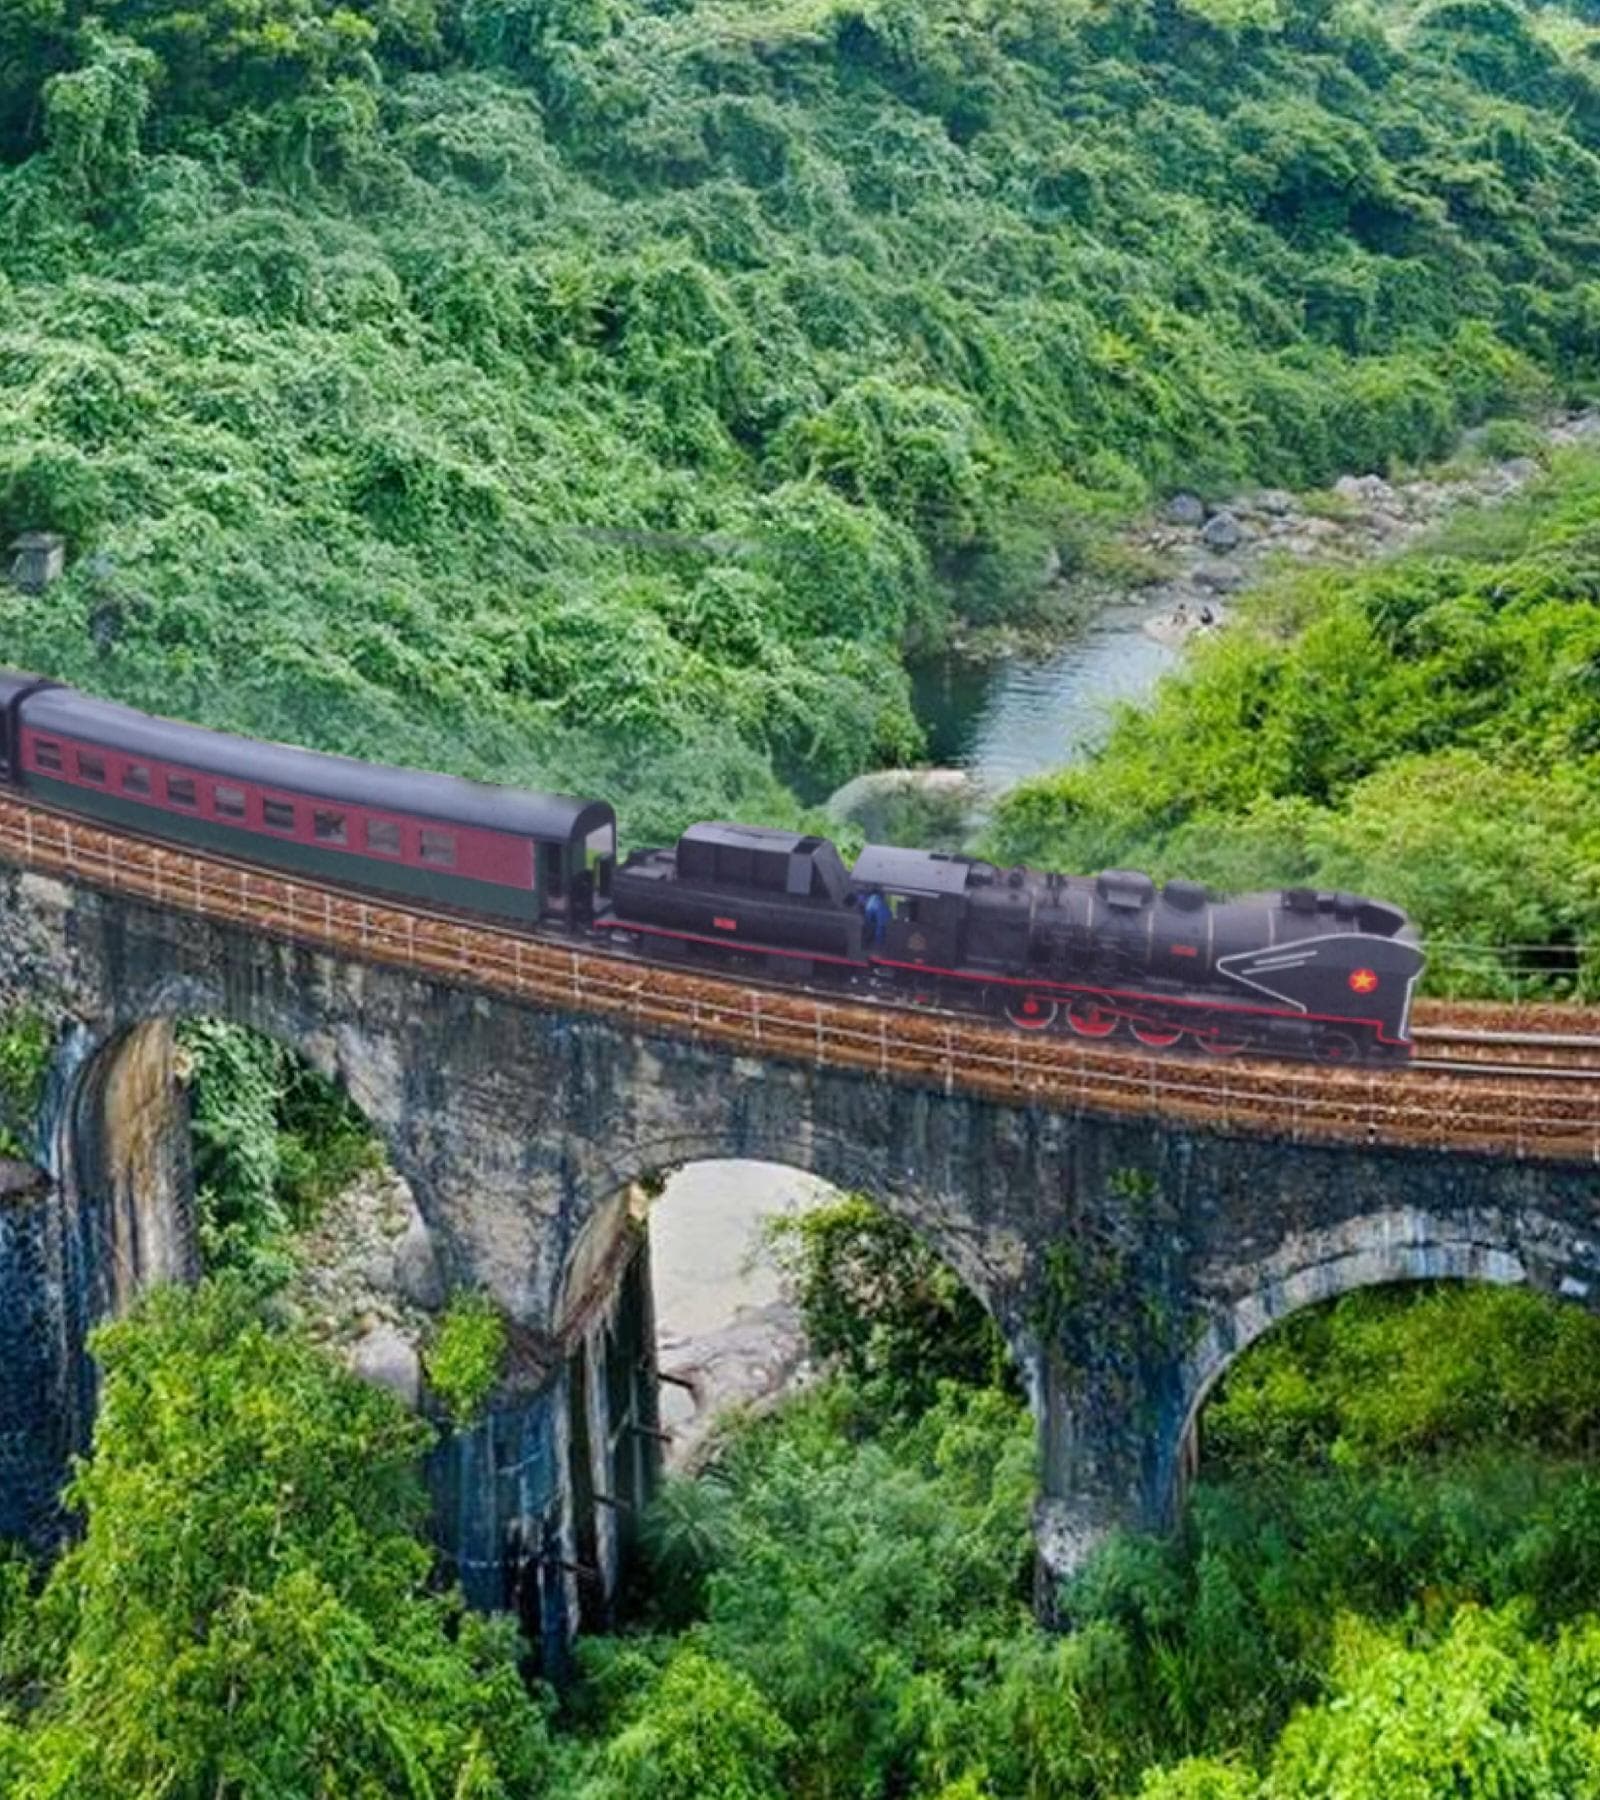 Revolution Express on a viaduct